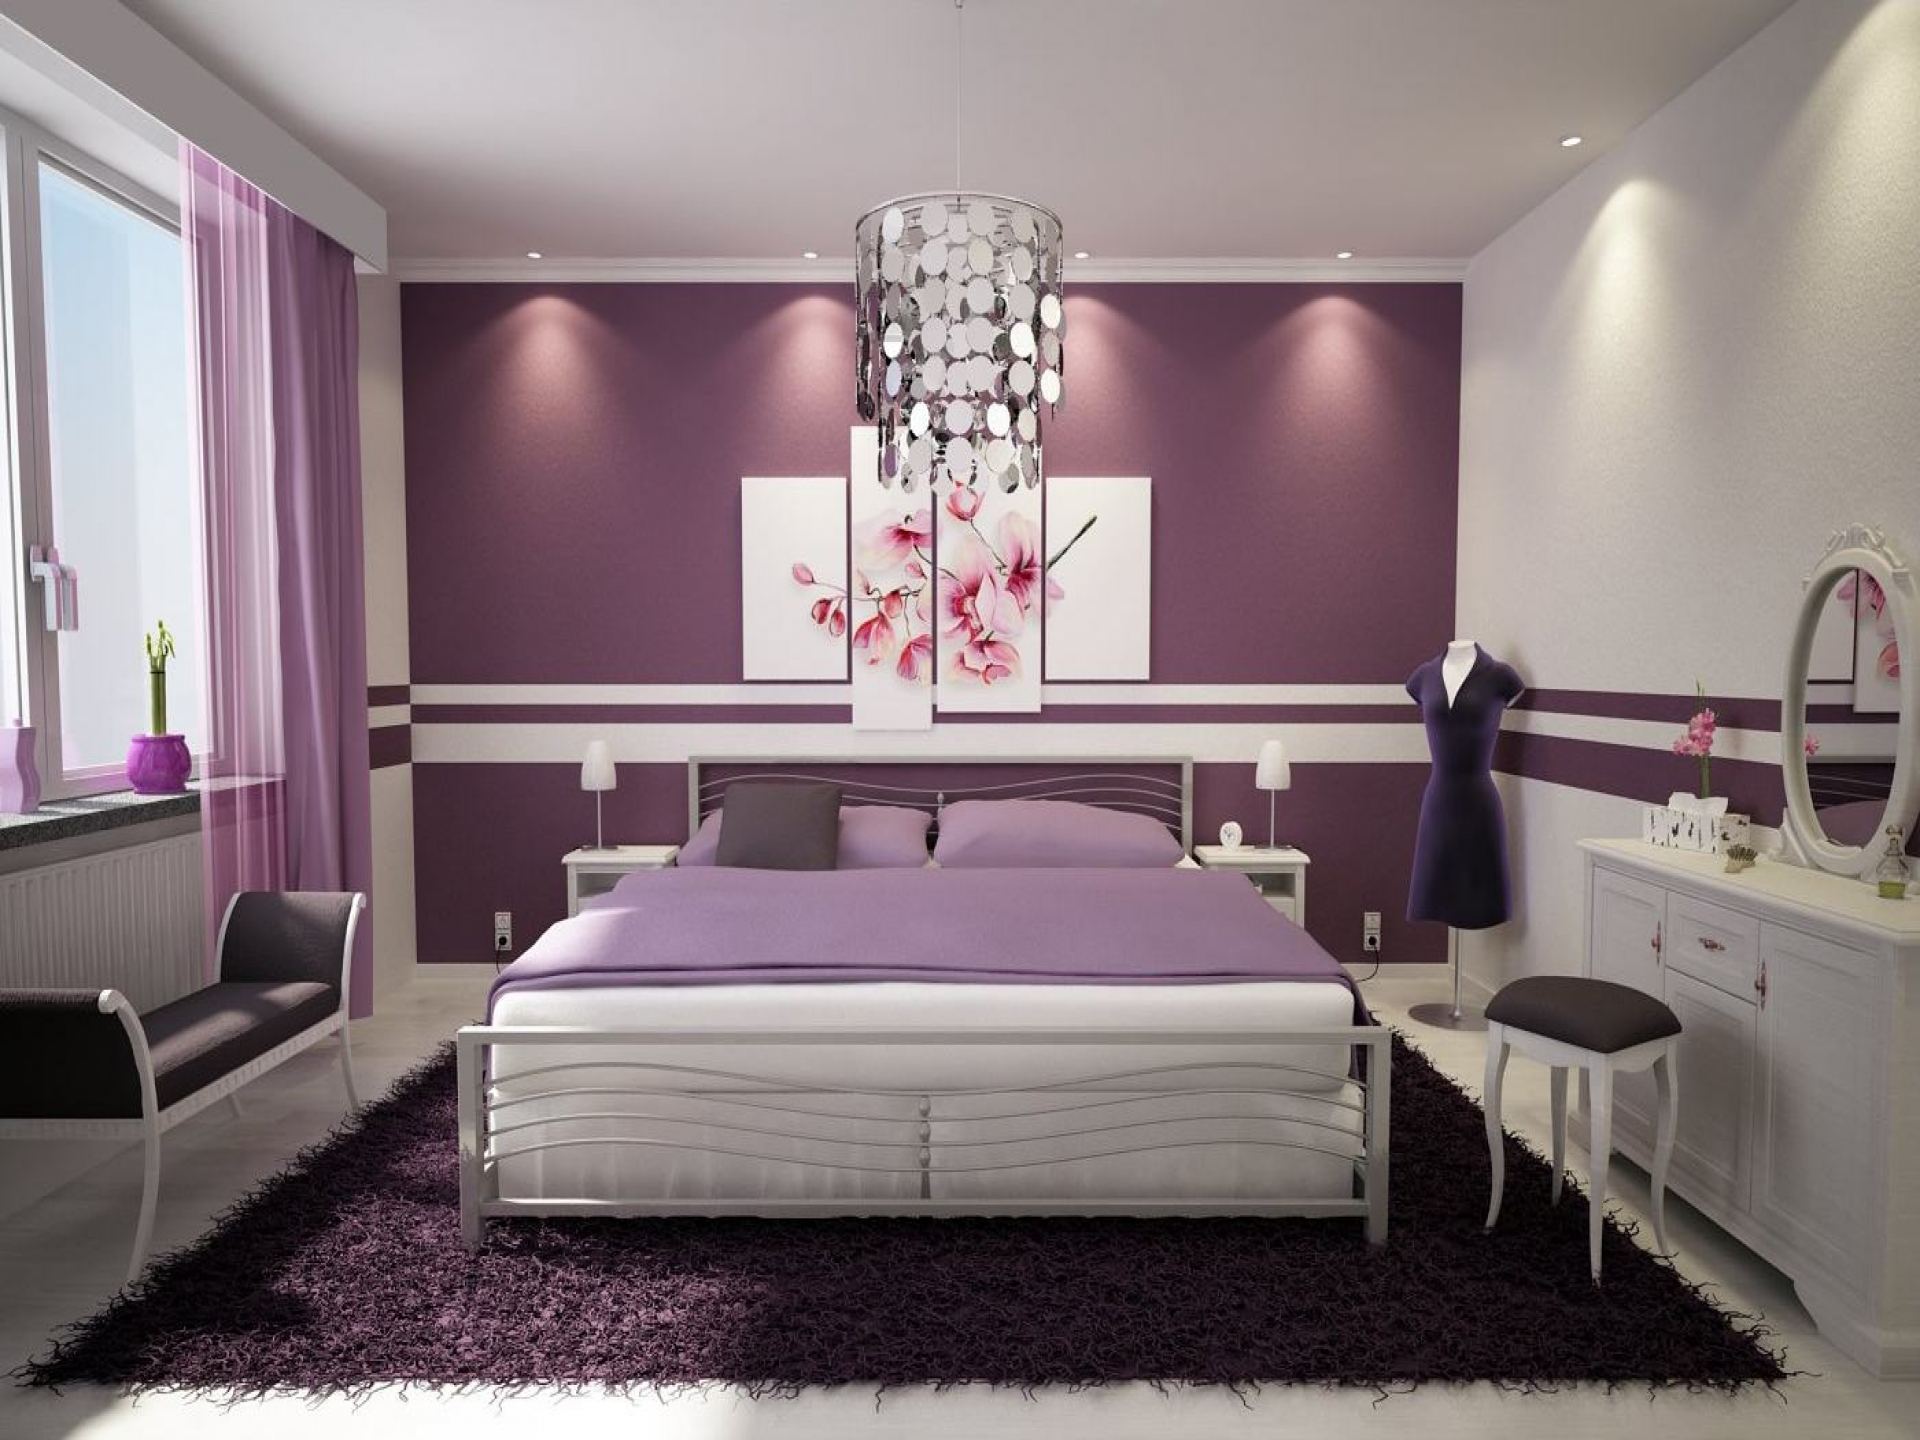 Cool bedroom decorating ideas for teenage girls Cuttingedgeredlands 17 Magnificent Purple Bedrooms That Are Worth Seeing 17 Magnificent Purple Bedrooms That